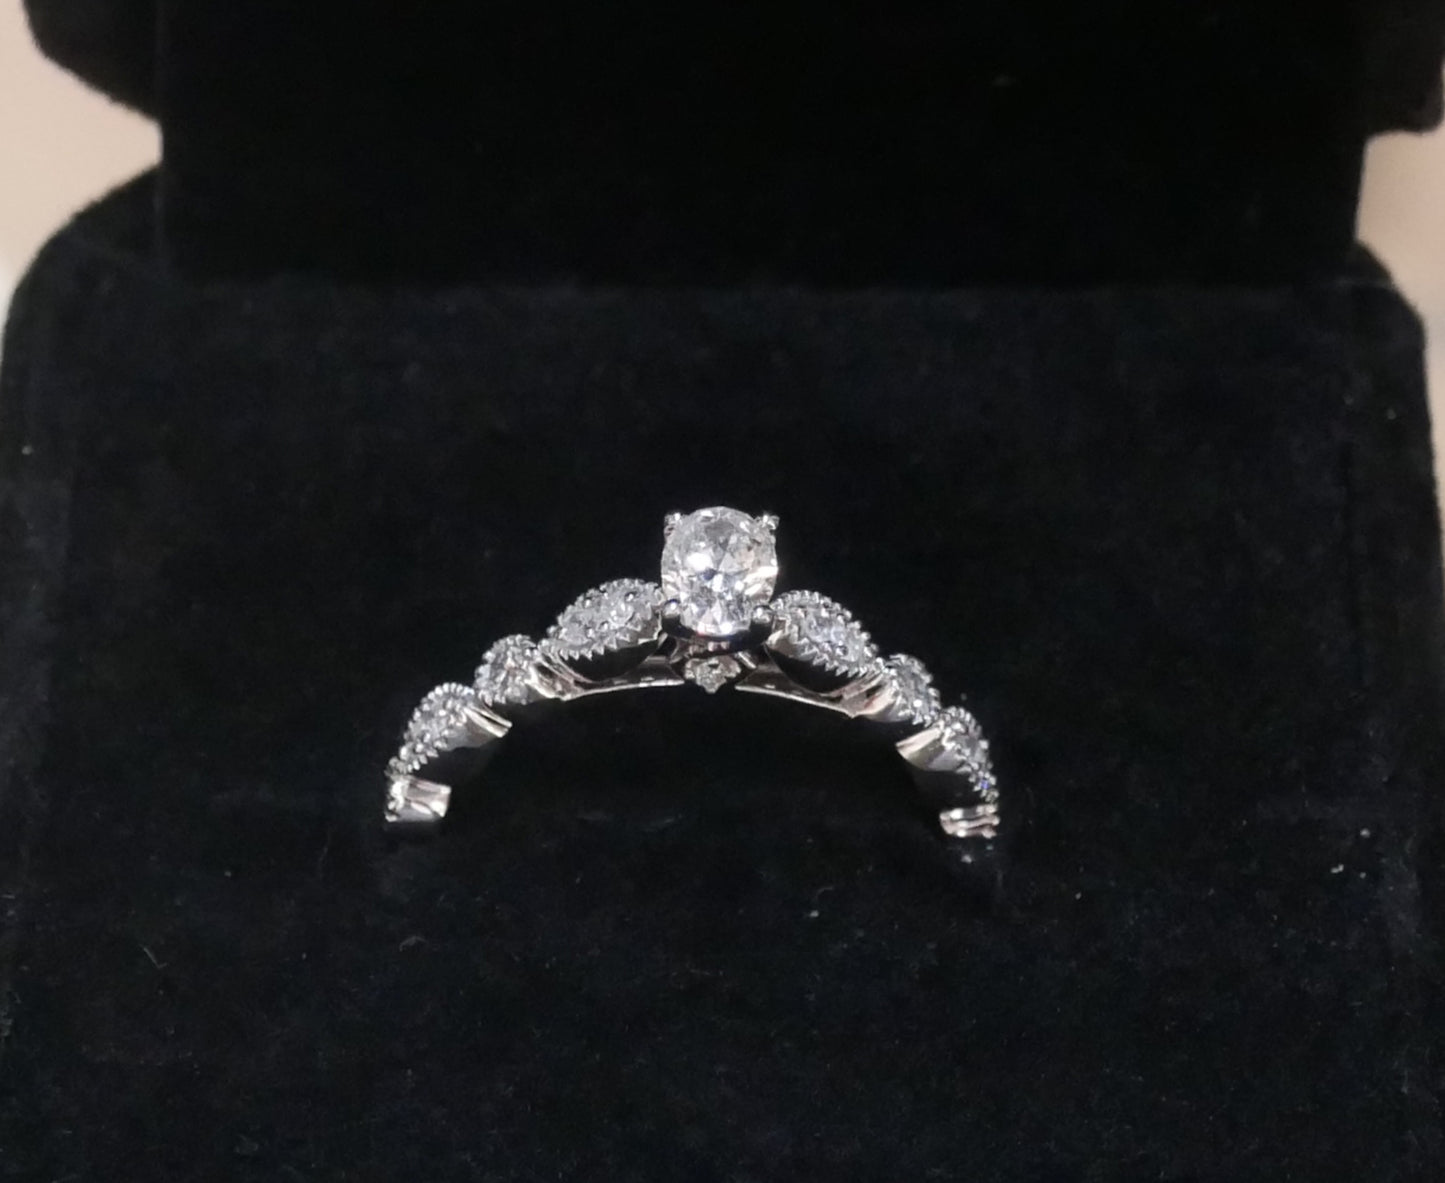 Ornate Diamond Ring with Decorative Band